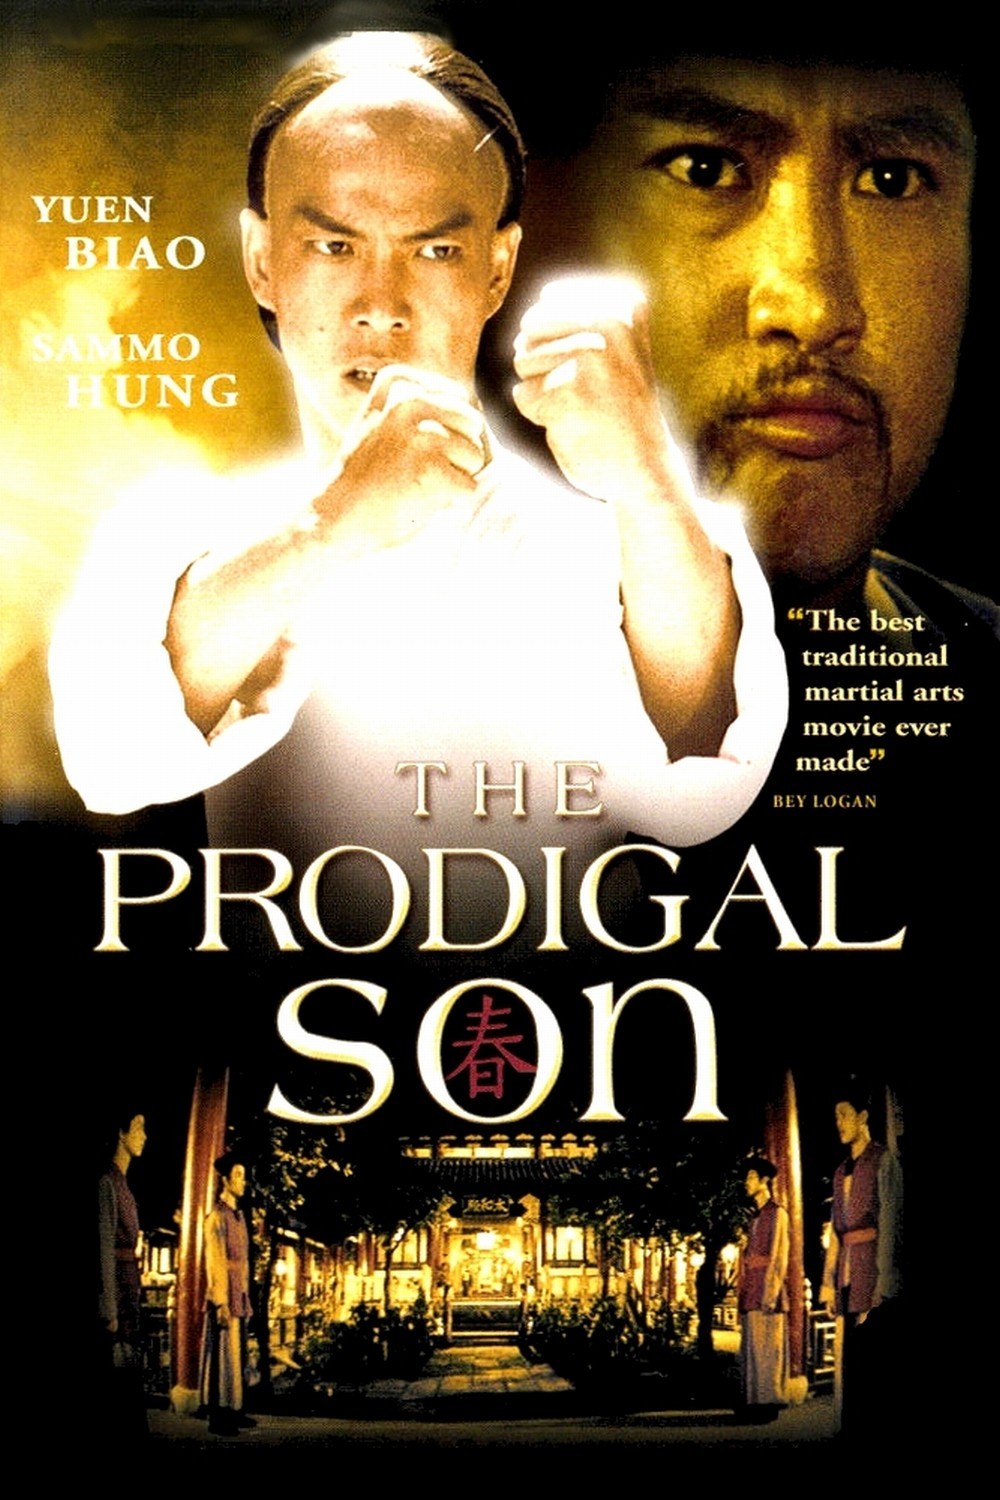 Poster for the movie "The Prodigal Son"